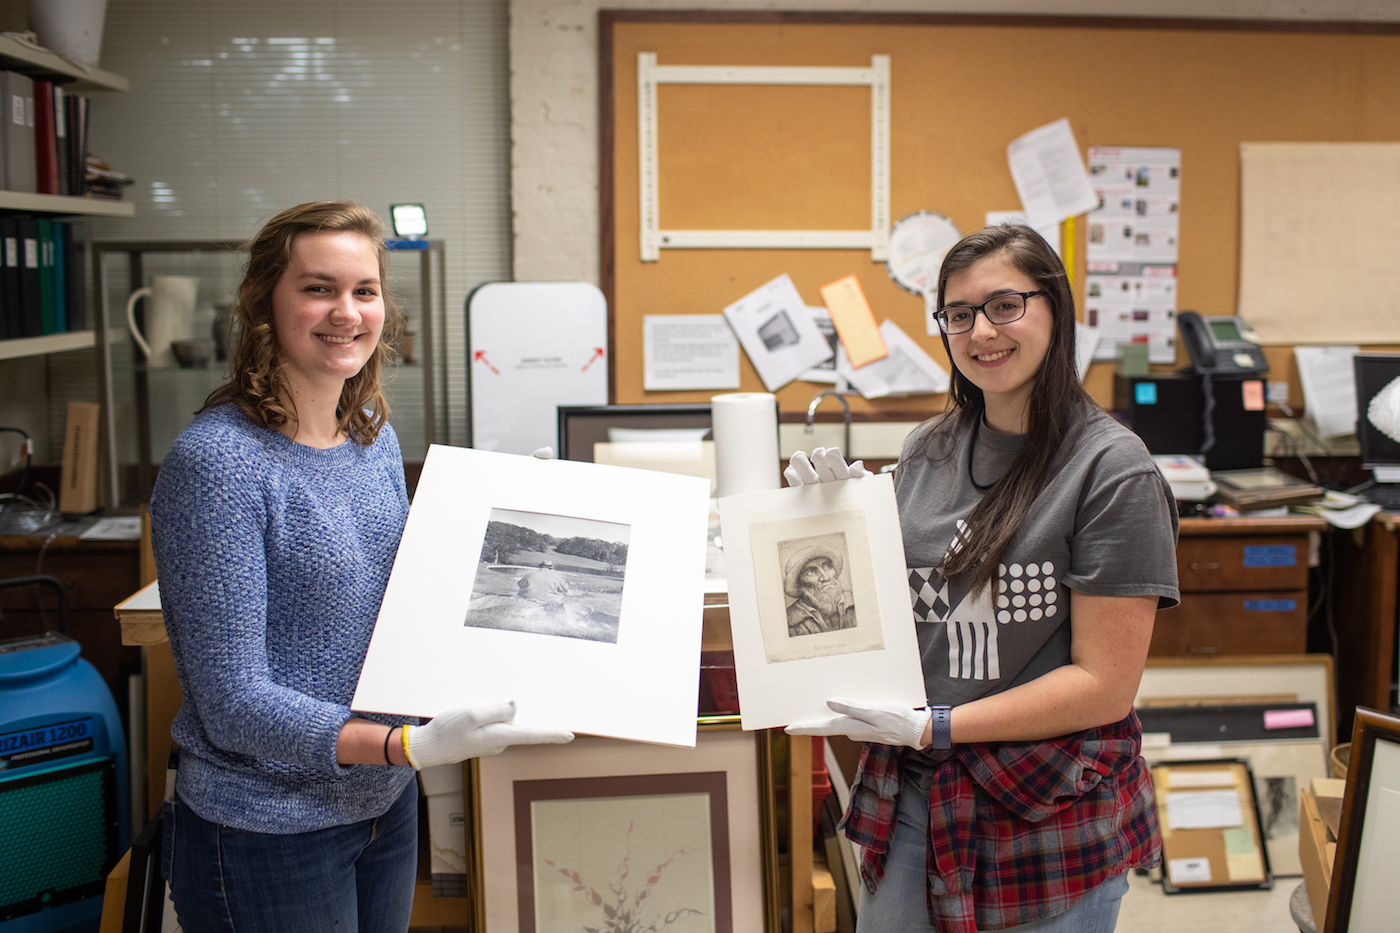 Art students Sarah Potter and Katherine Tolleson hold their discoveries. Potter is holding a Philippe Halsman photo print of Winston Churchill, and Tolleson is holding a drypoint by Alphonse Legros.